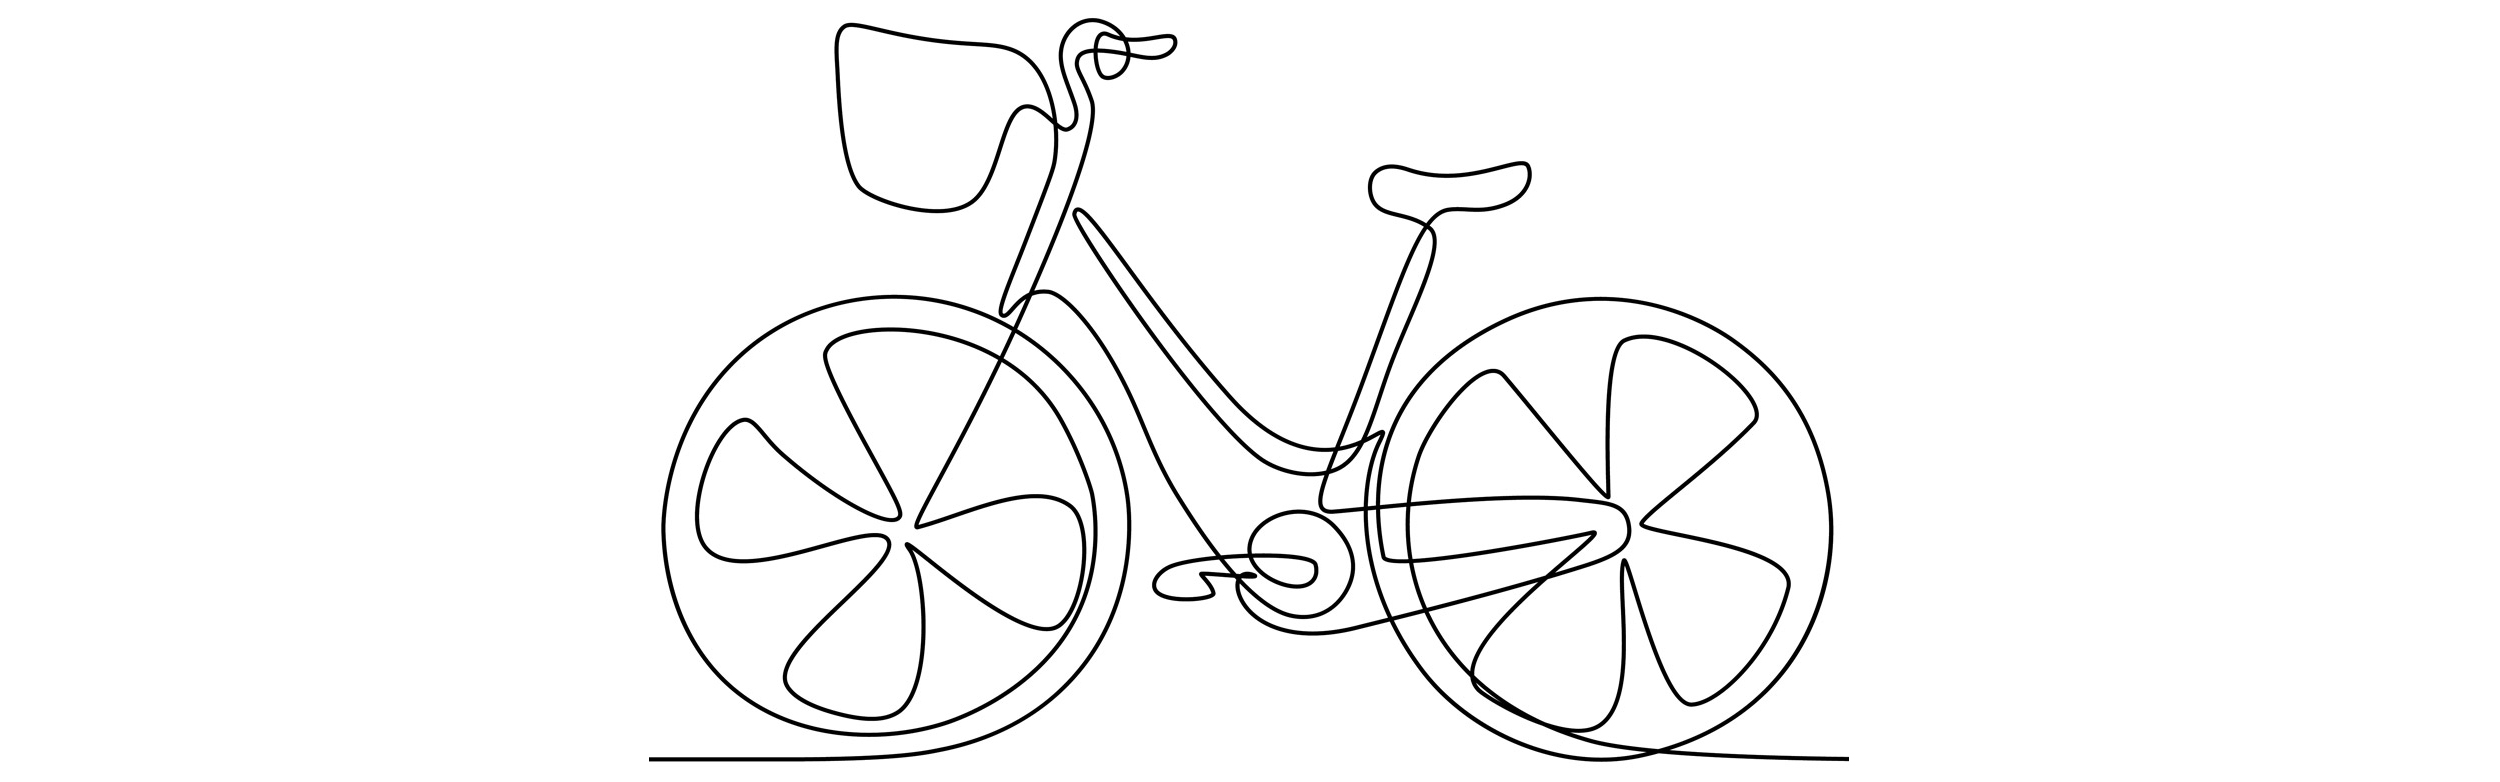 Sketch of a bicycle.